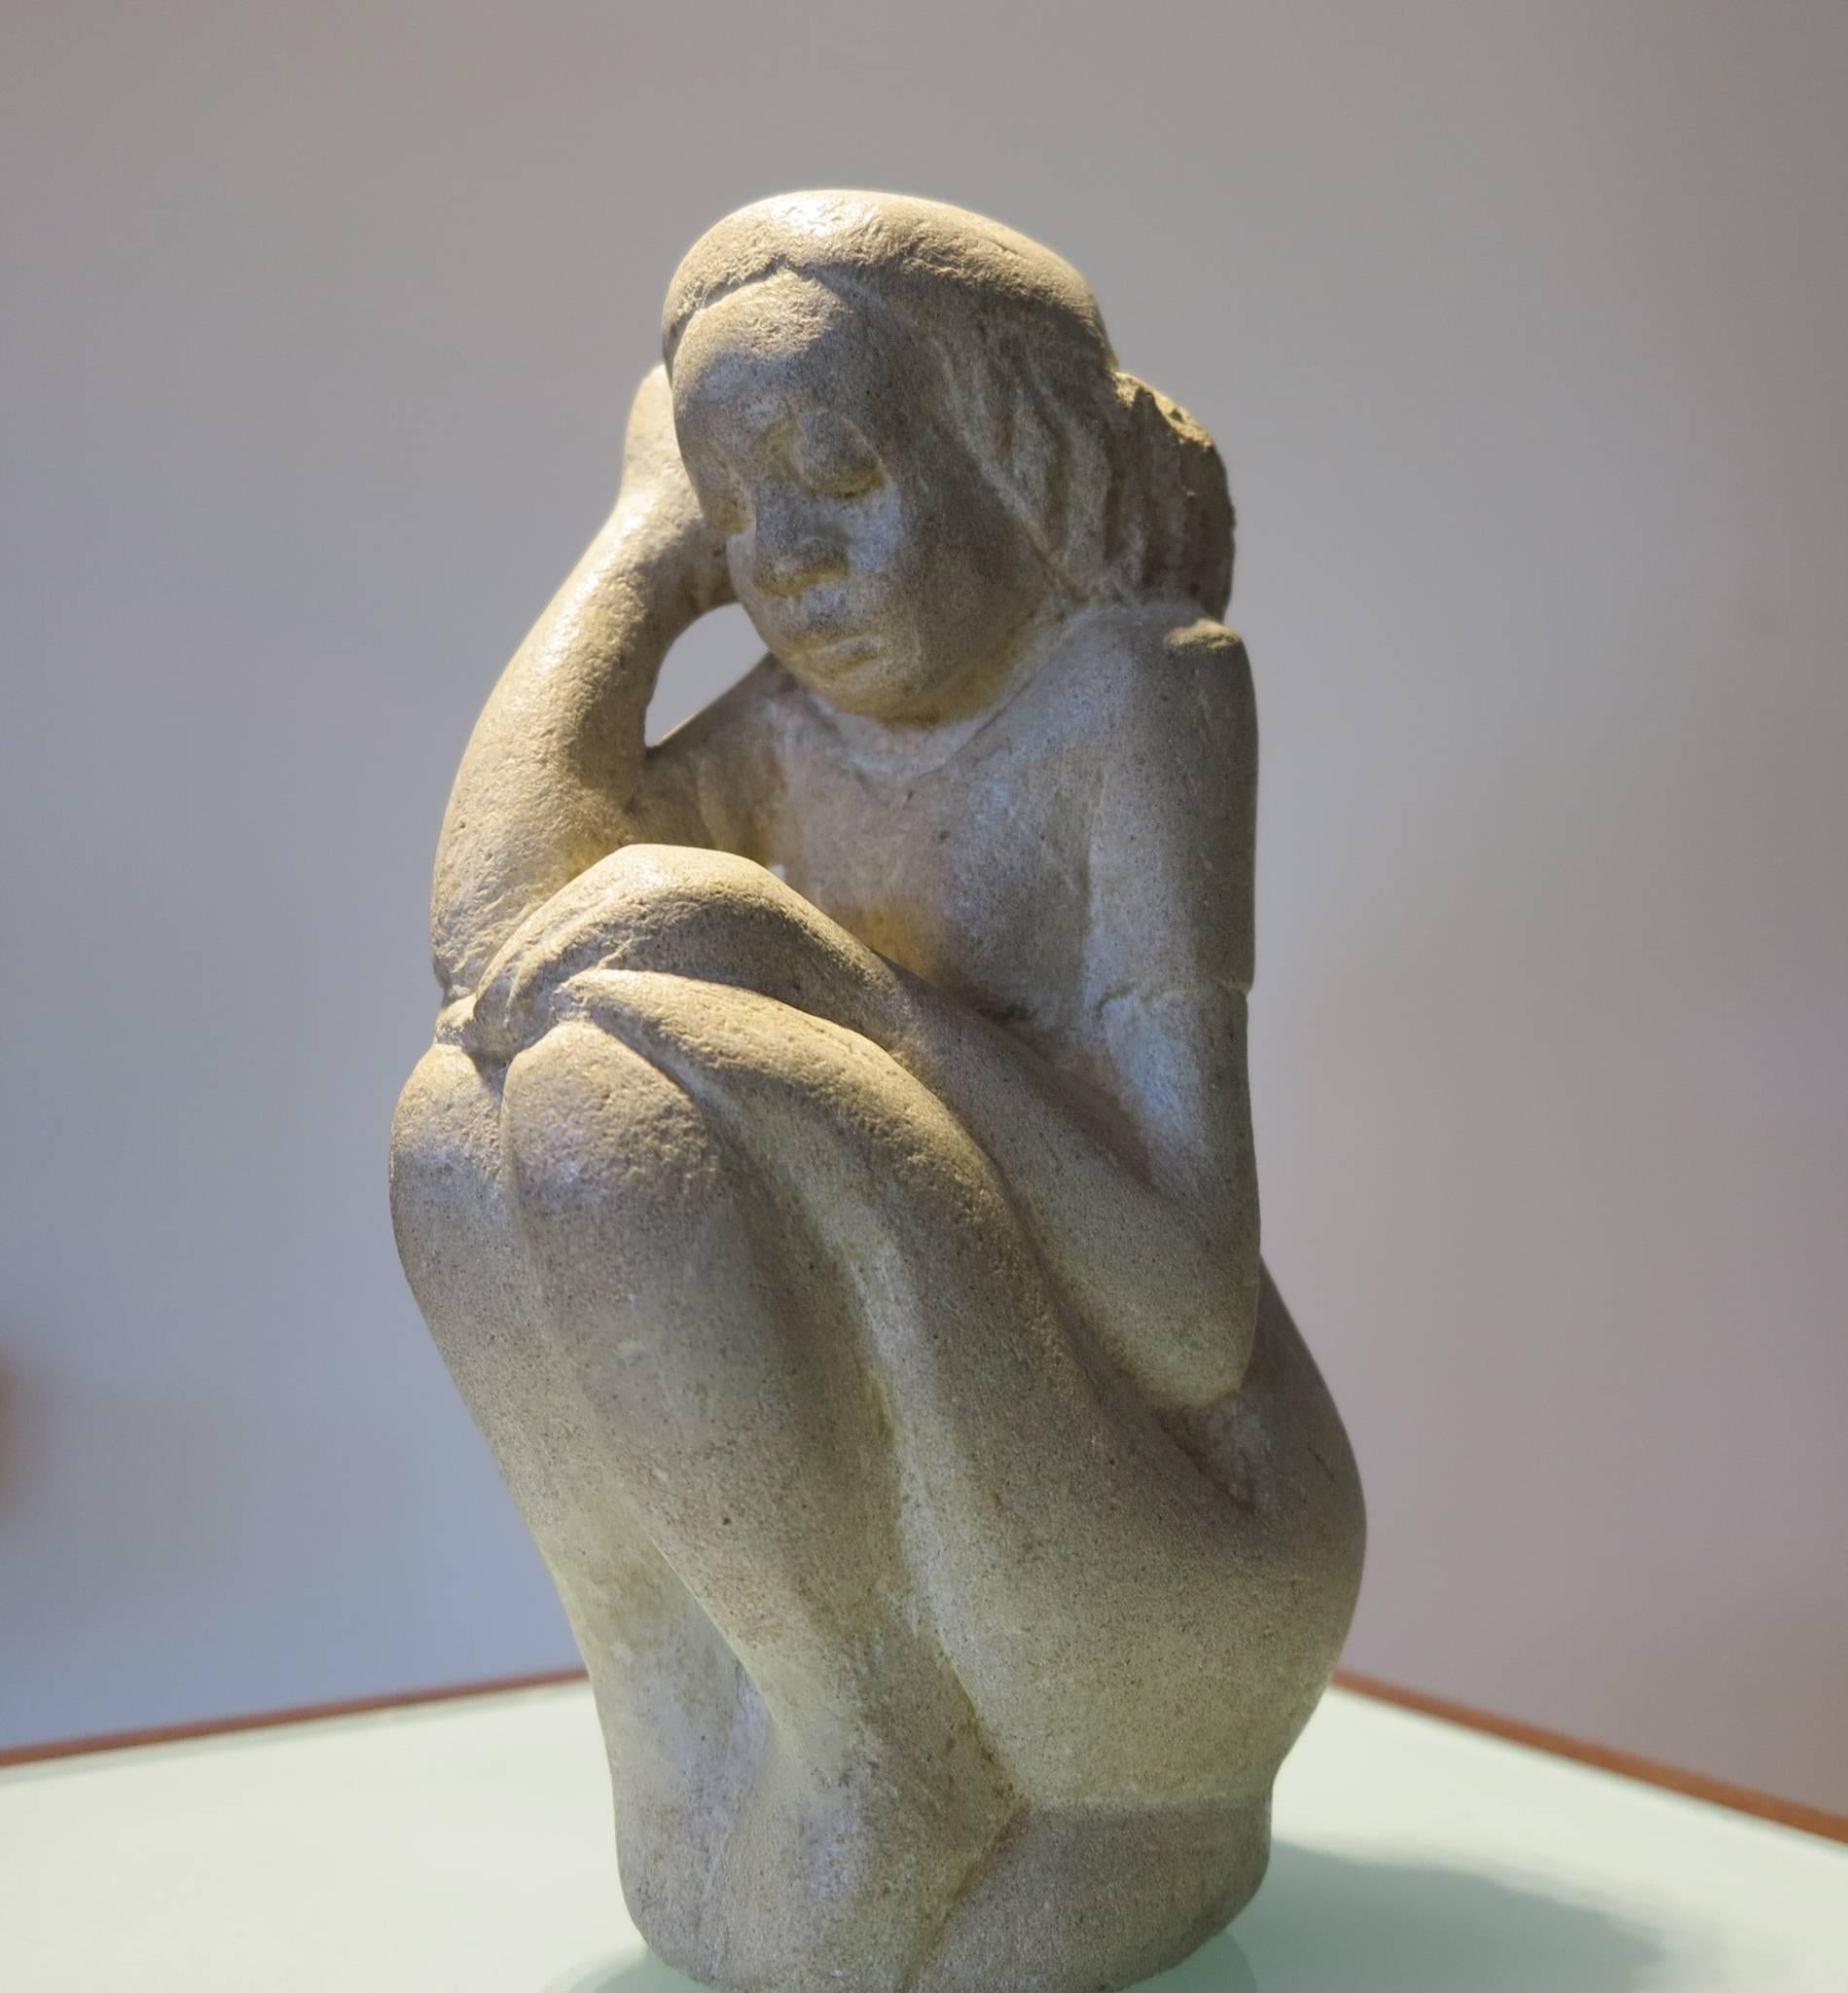 Woman in Contemplation - Gray Figurative Sculpture by Unknown